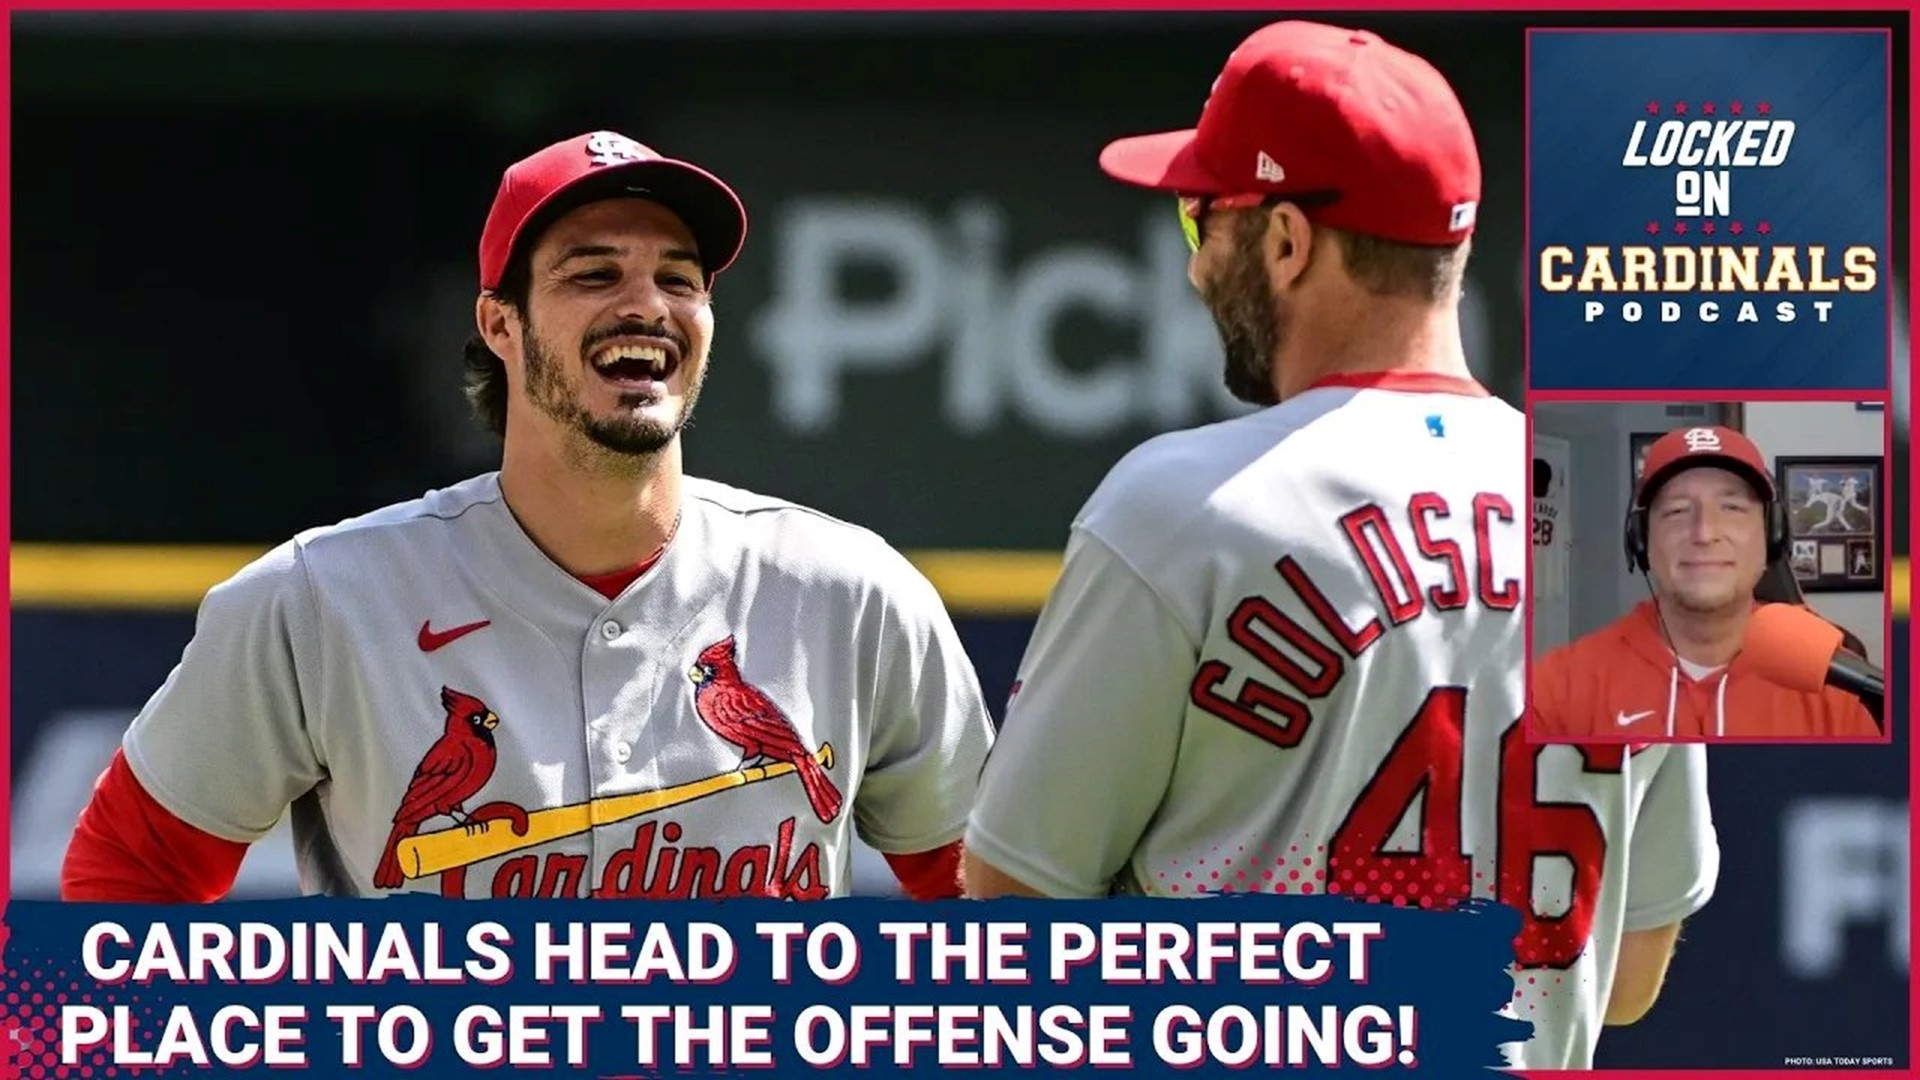 Is Coors Field Just What The Doctor Ordered To Jumpstart This St. Louis Cardinals Offense?